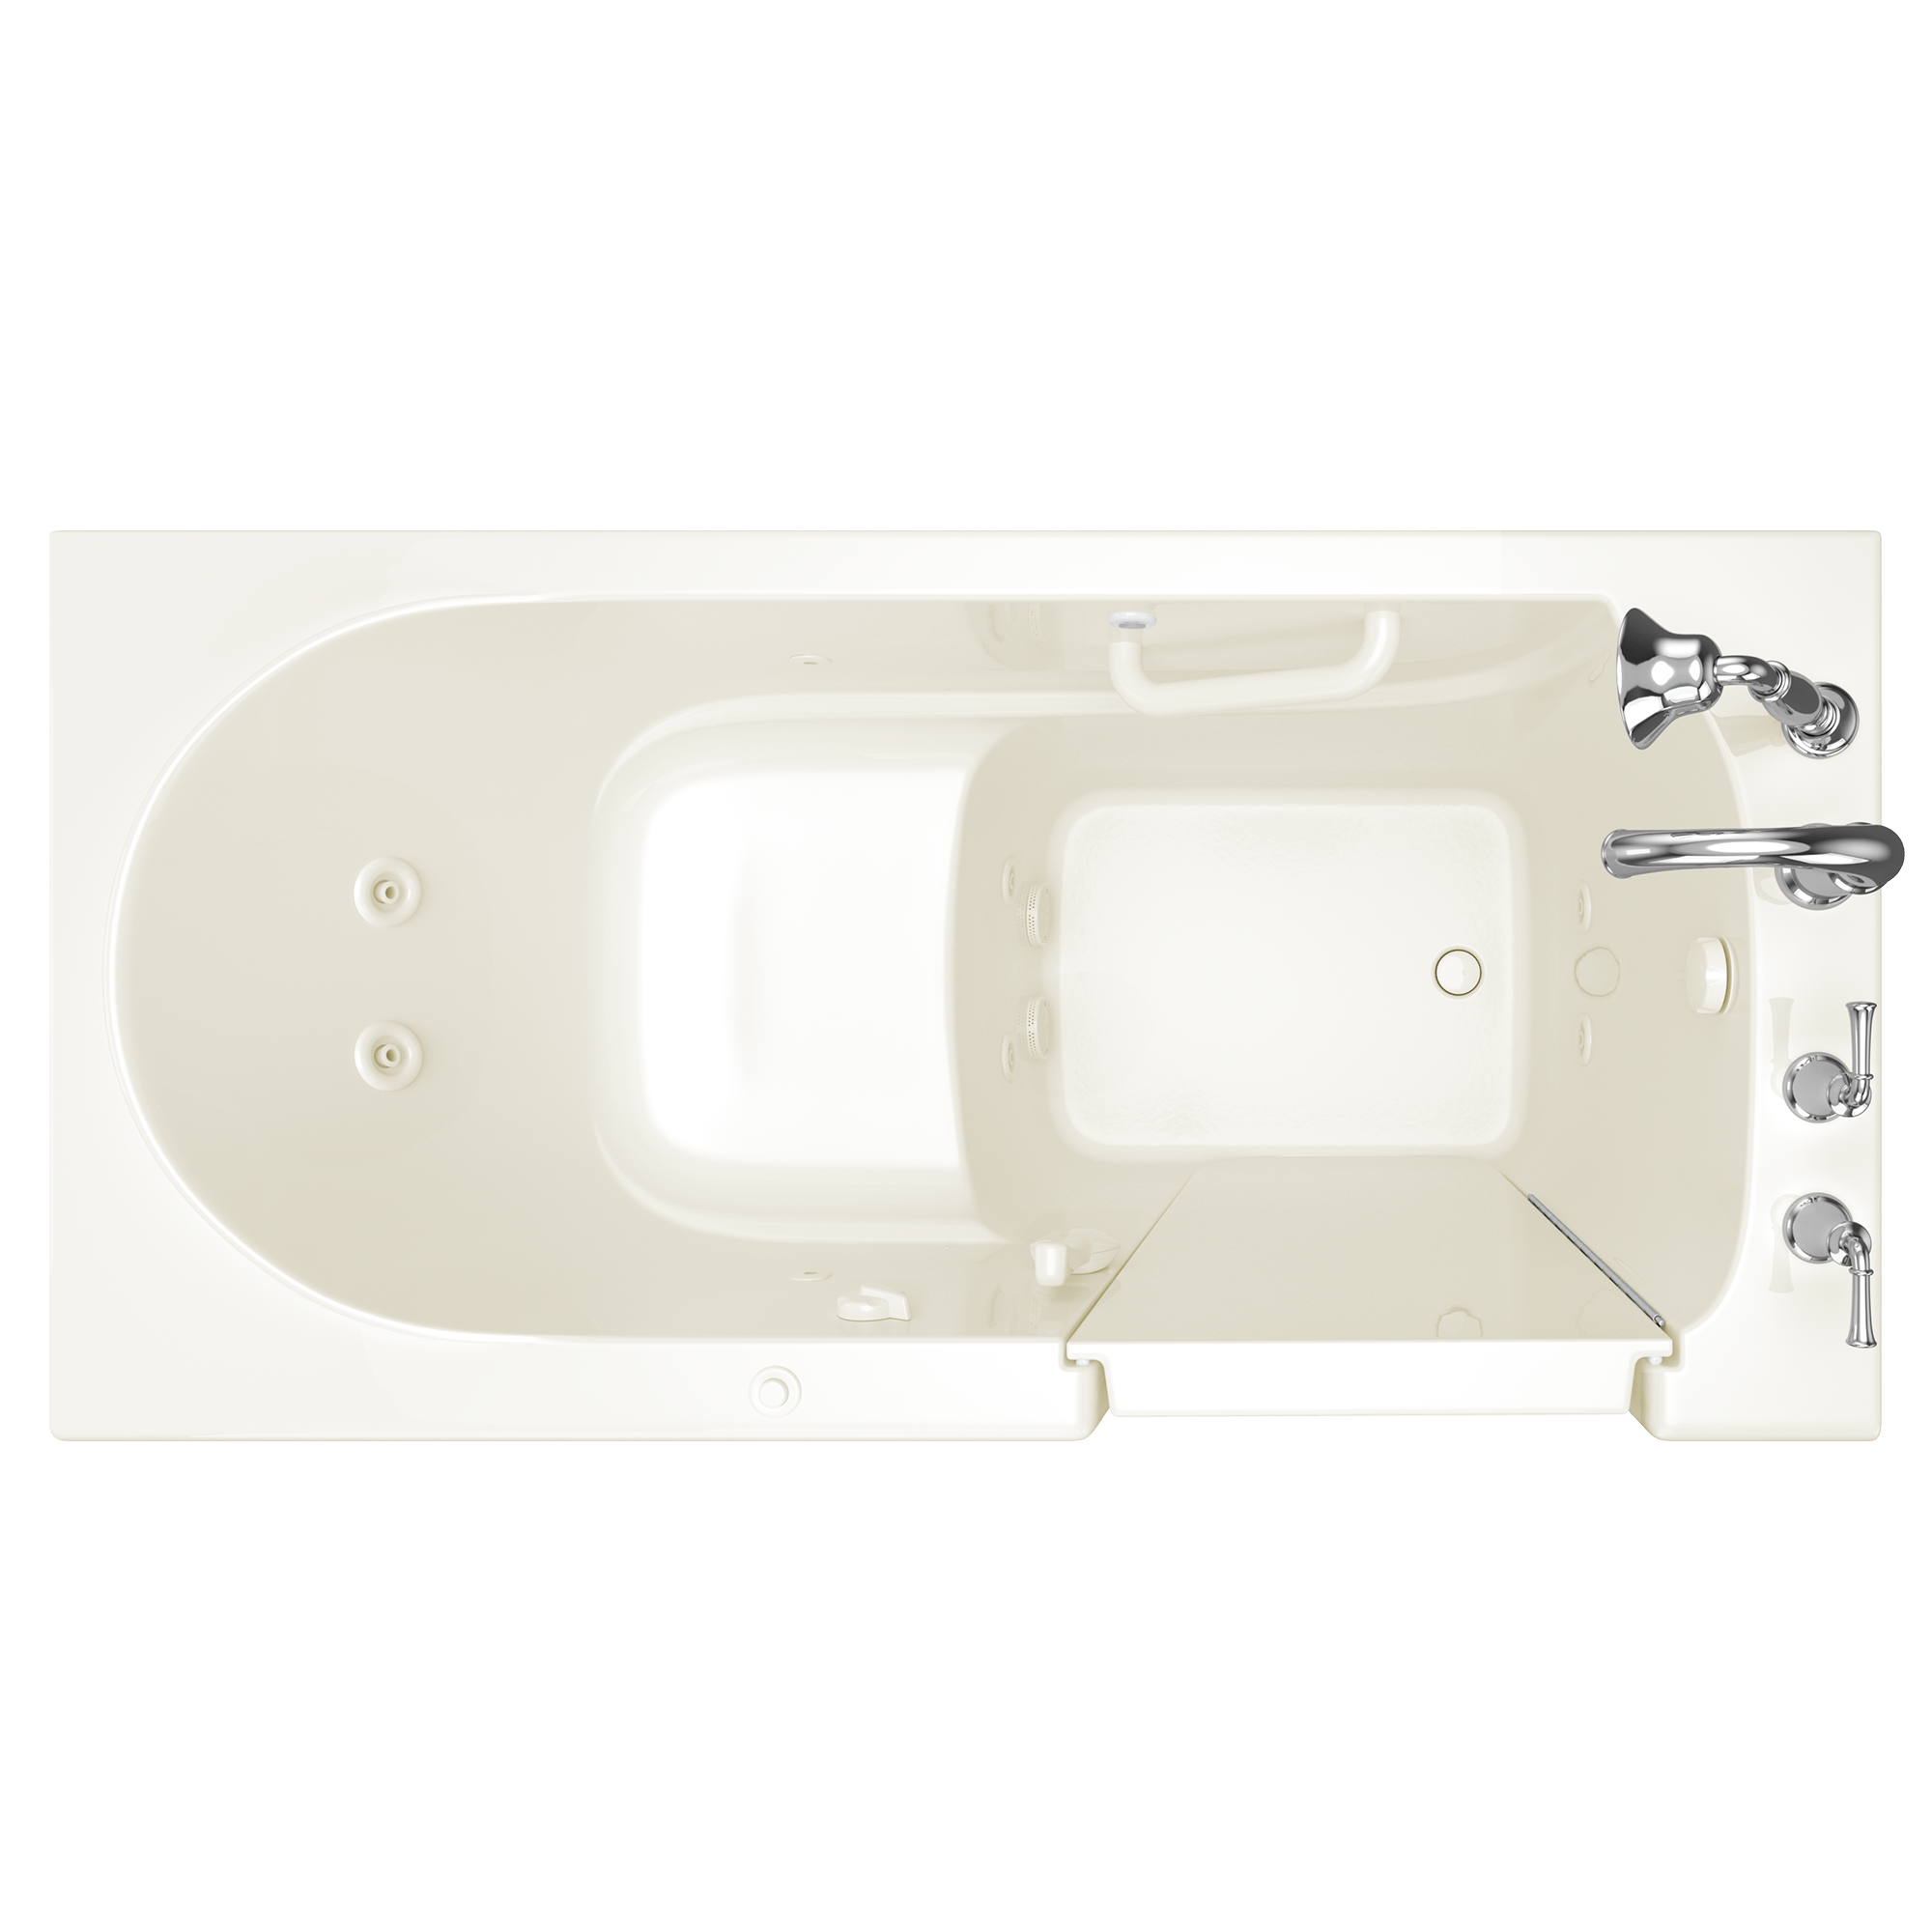 Gelcoat Value Series 30x60 Inch Walk-In Bathtub with Whirlpool Massage System - Right Hand Door and Drain